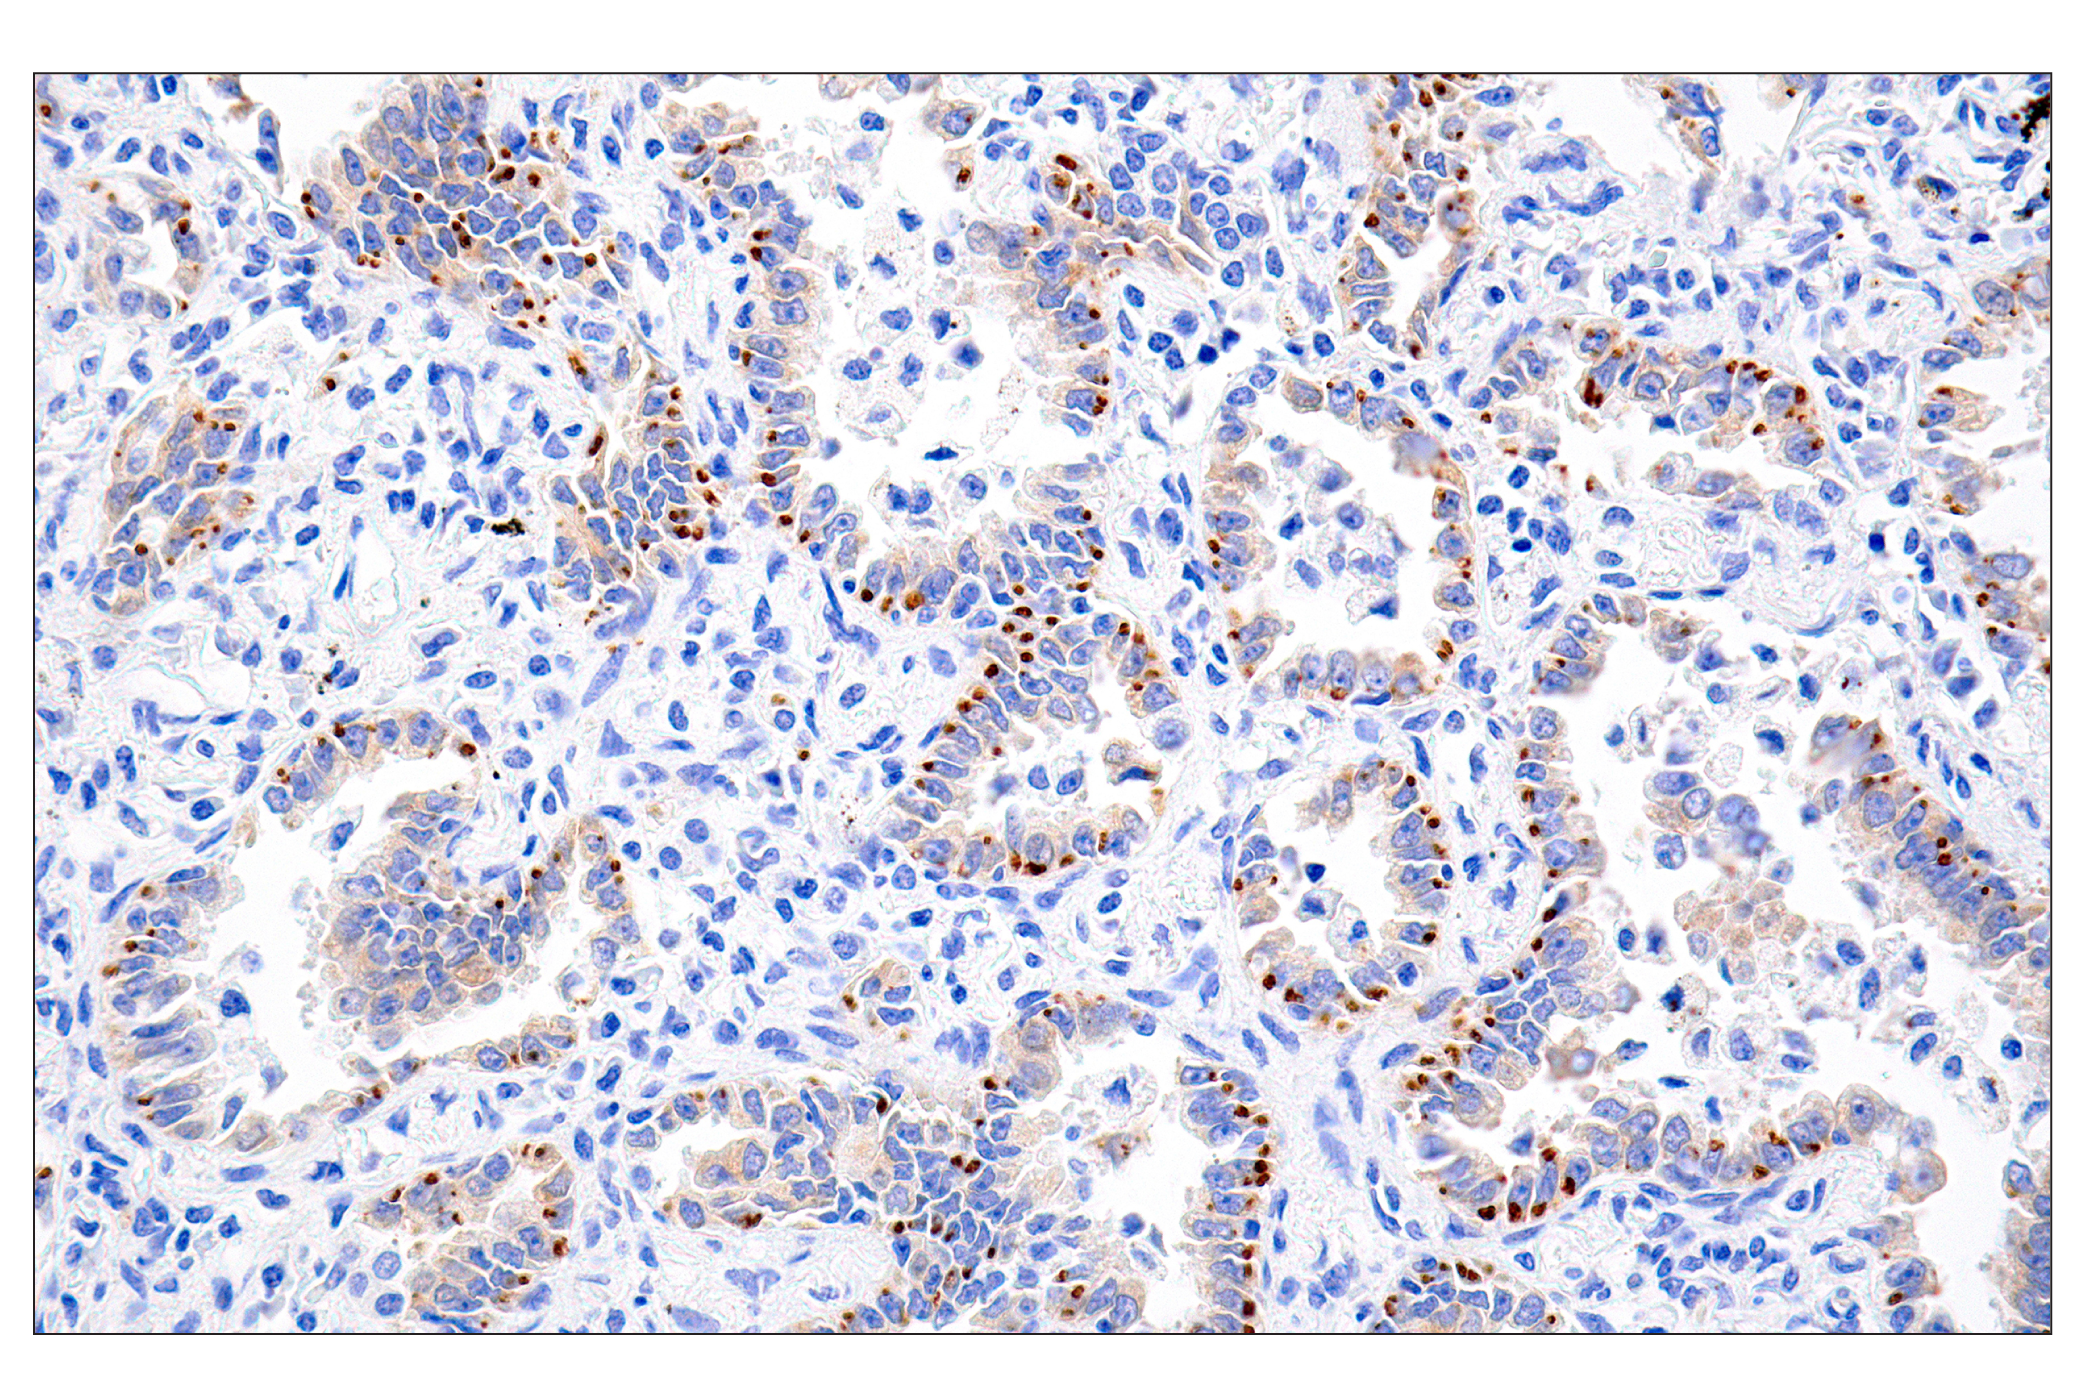 Immunohistochemistry Image 1: ROS1 (D4D6®) Rabbit mAb (Autostainer Formulated)